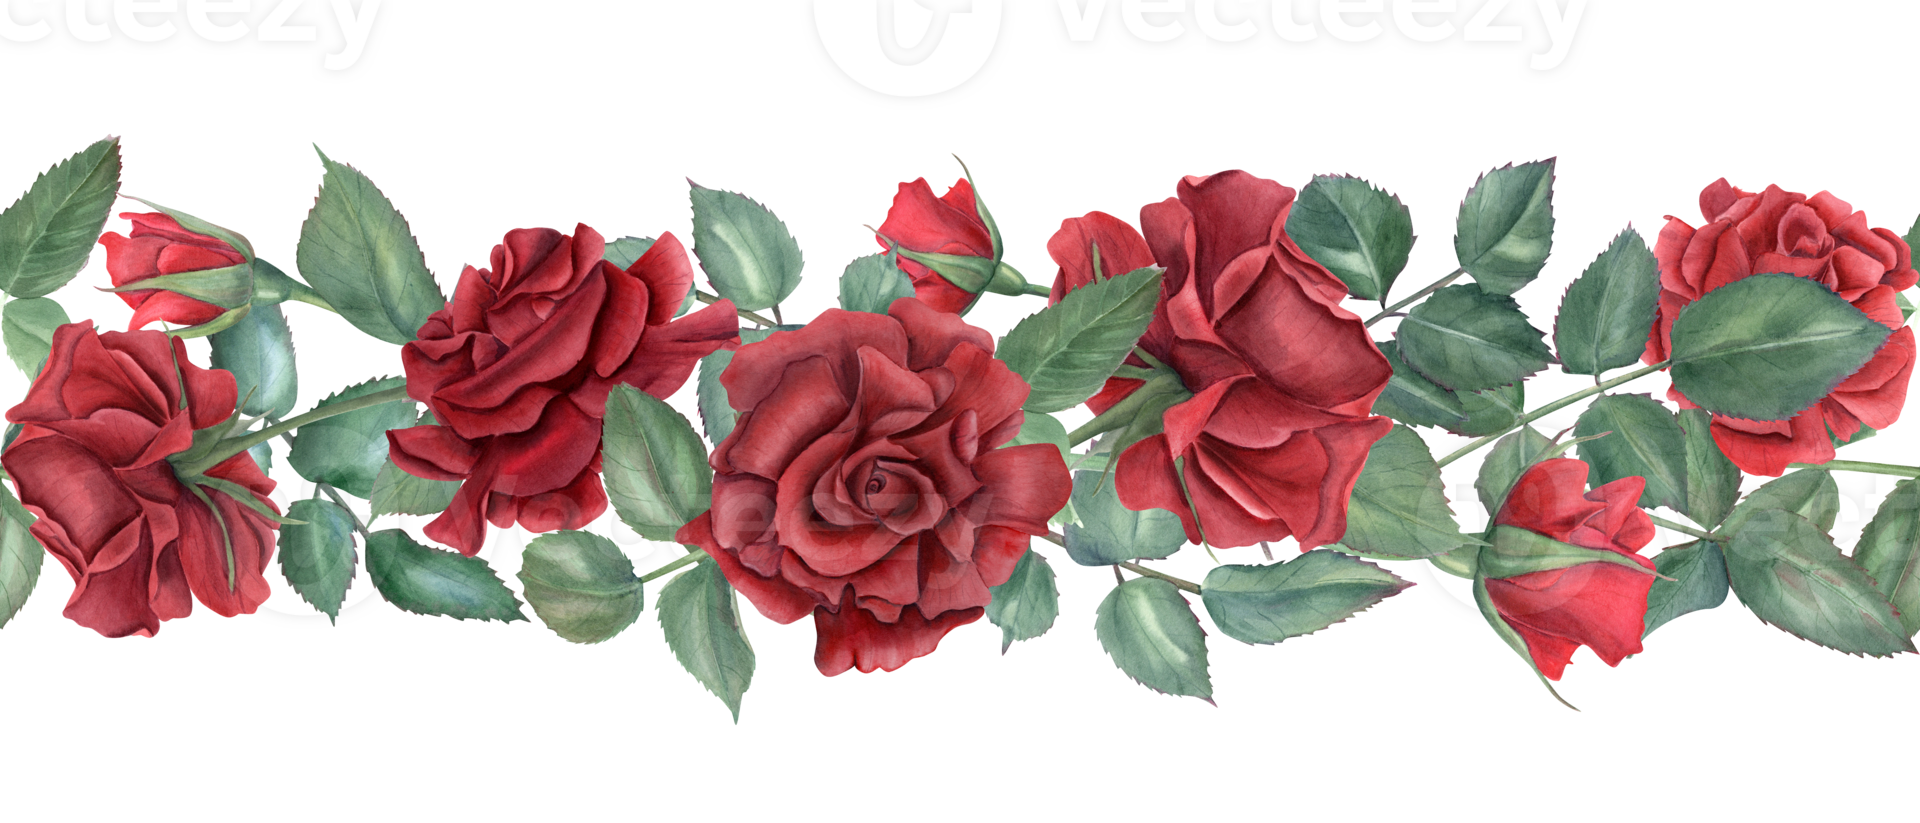 Border with red roses. Ruby flowers and green leaves. Intertwining rose stems with buds. Blooming summer plants. Seamless ornate. Watercolor illustration for wedding design, memorial day decor png